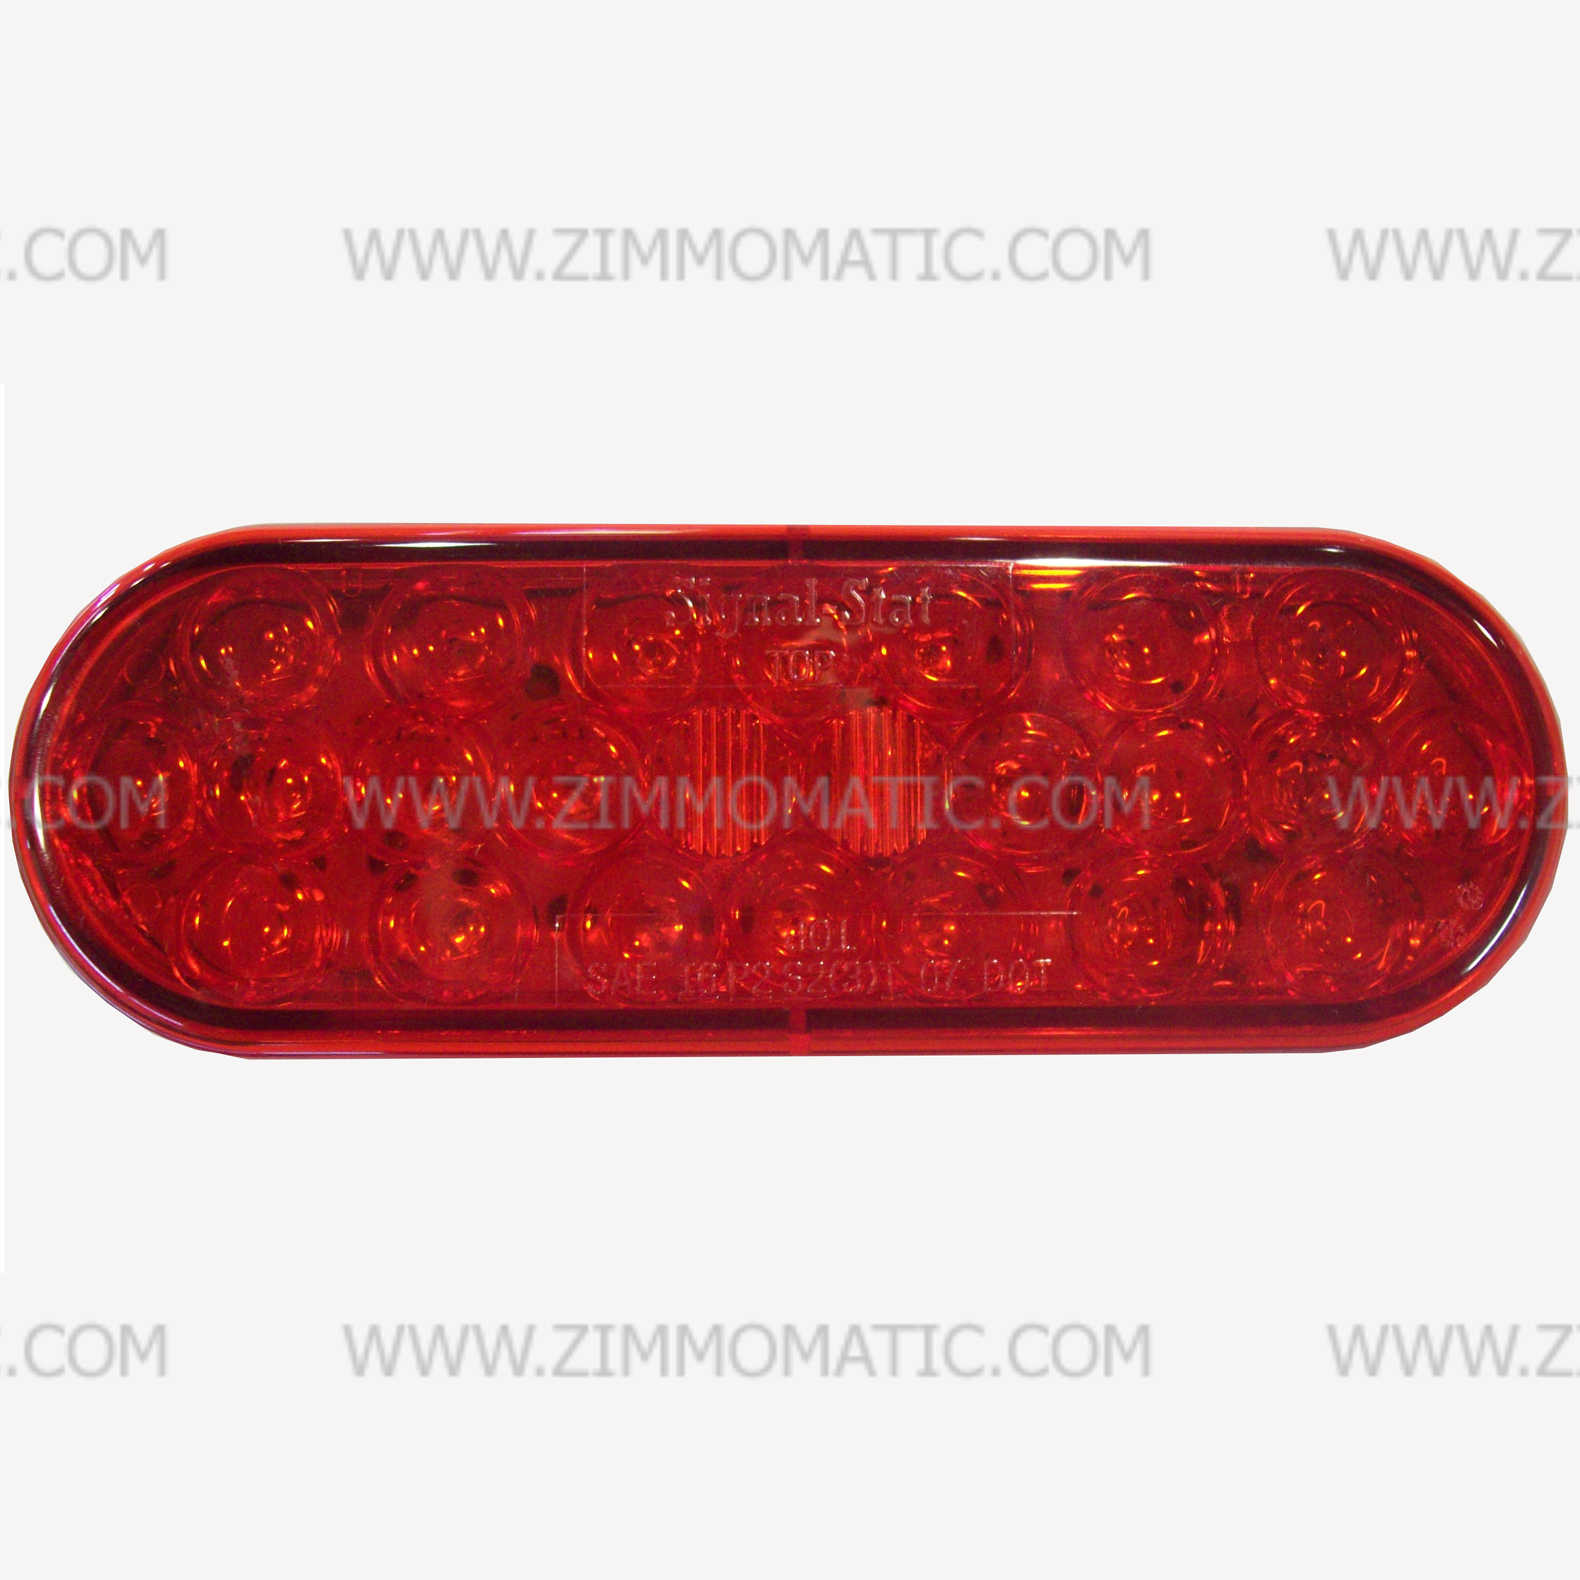 light, 2 x 6 inch oval, LED red